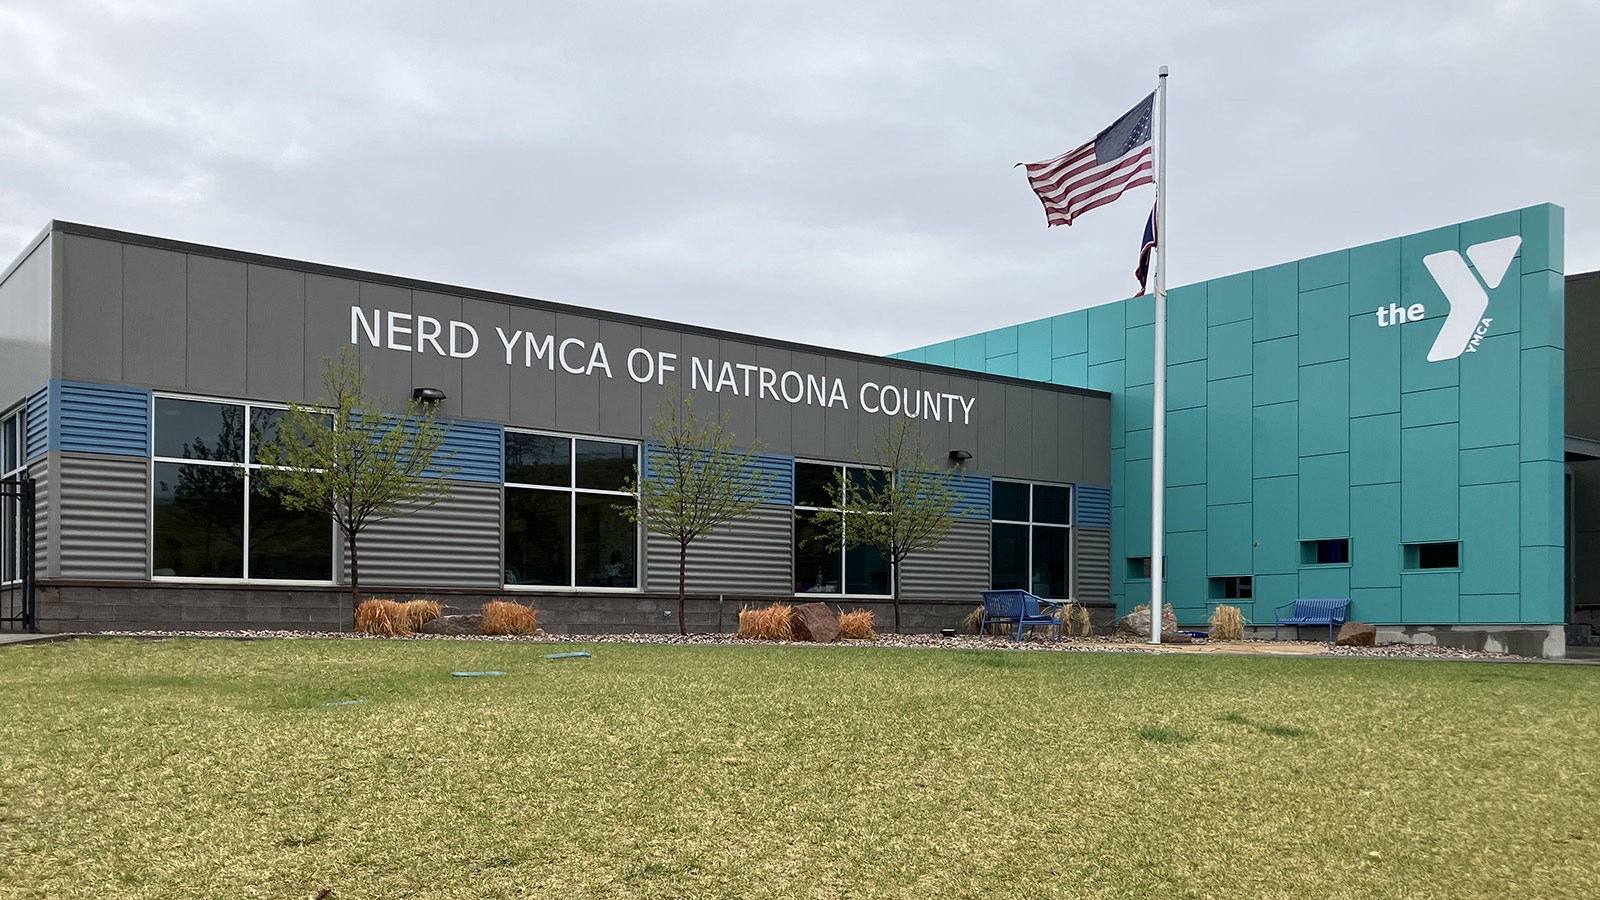 A meeting of Casper community professionals is set for May 17 at the Casper YMCA. The agenda will include developing an action plan to help the city’s youth.